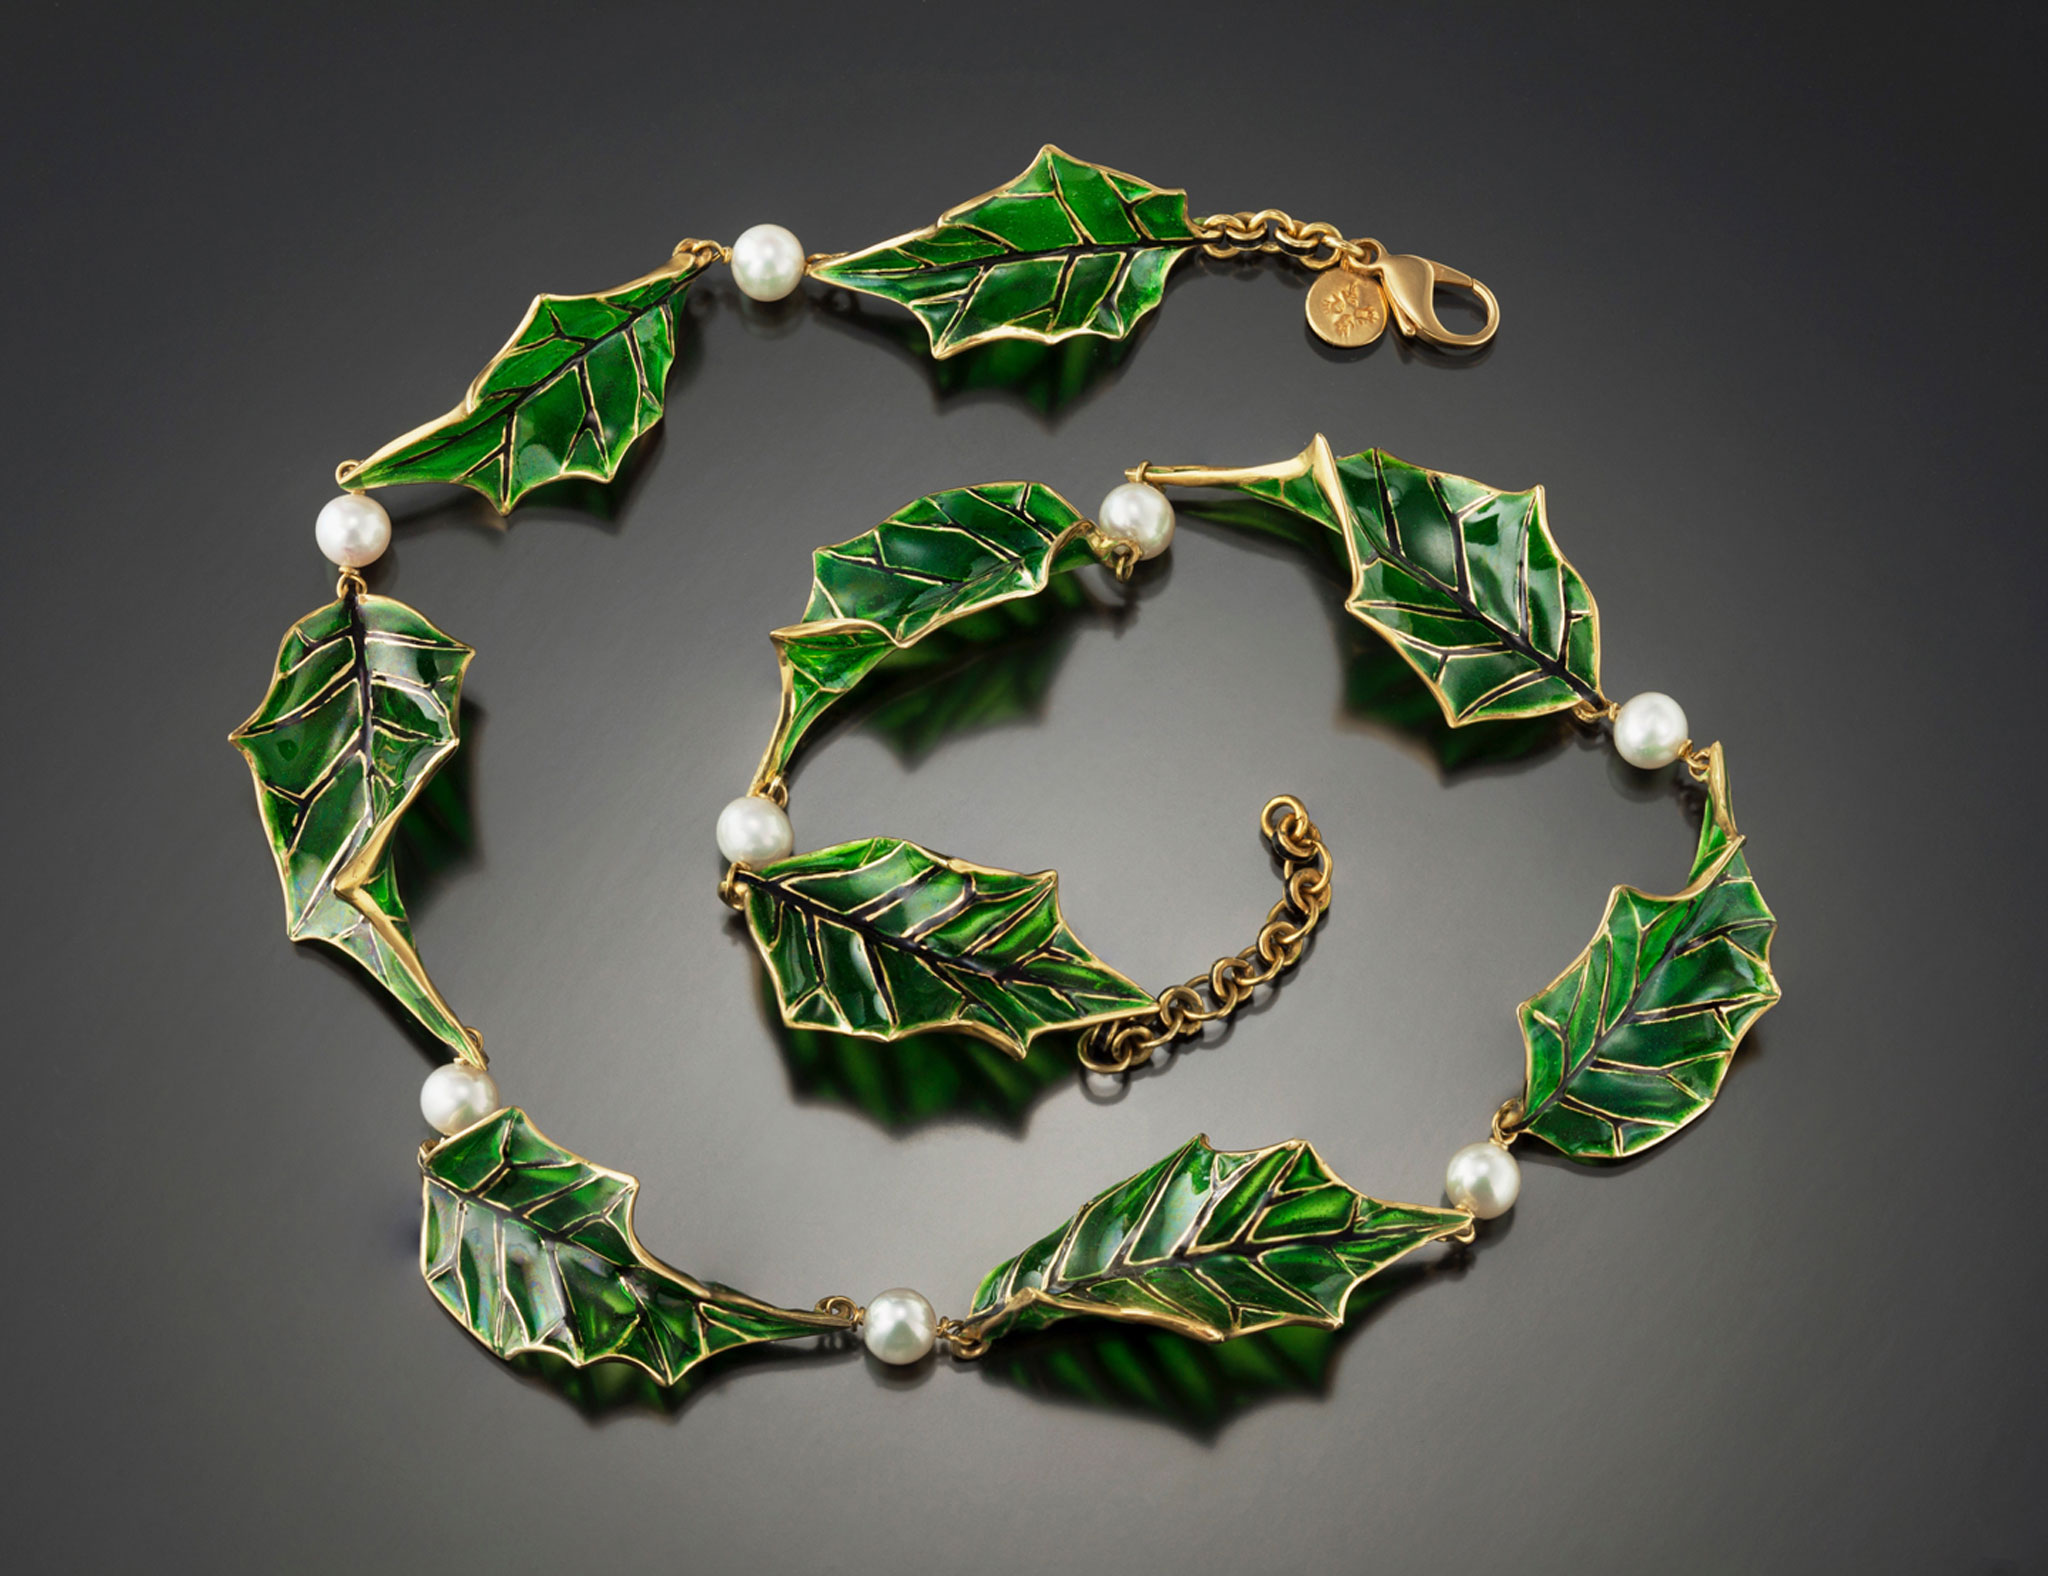 Tom Herman, Plique-à-jour holly necklace. Courtesy of the artist. JEWELRY episode of Craft in America